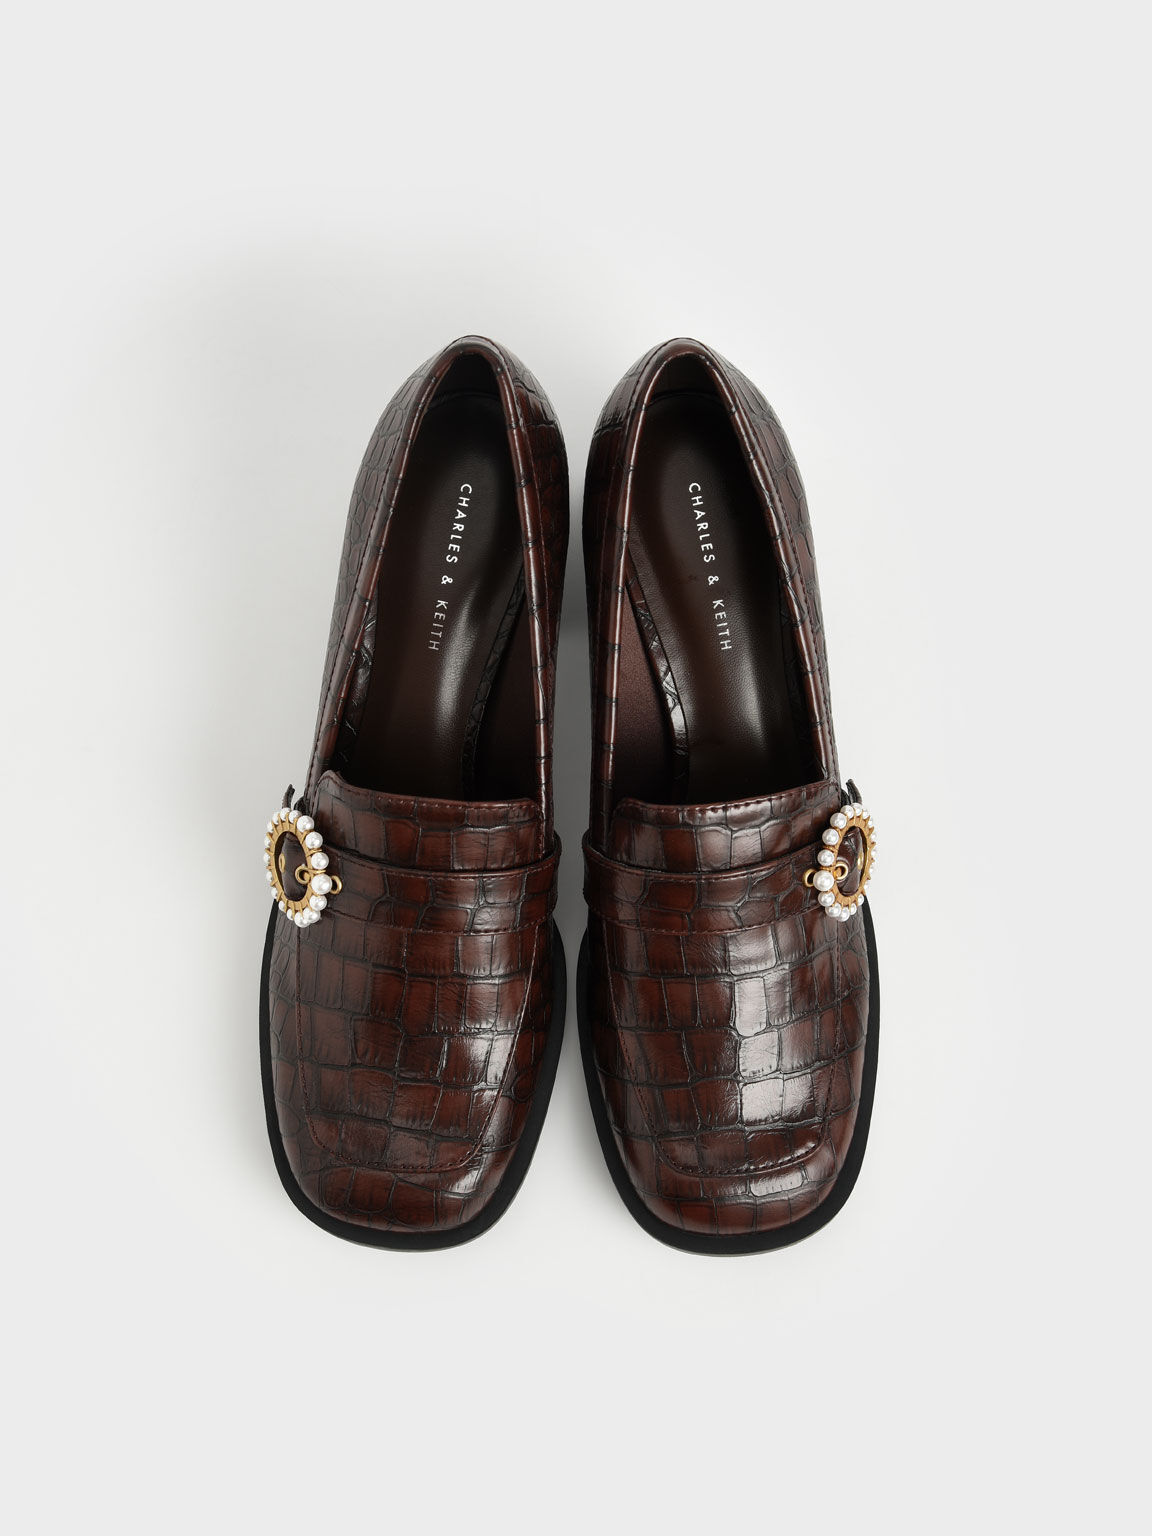 Beaded Accent Croc-Effect Loafer Pumps, Animal Print Brown, hi-res